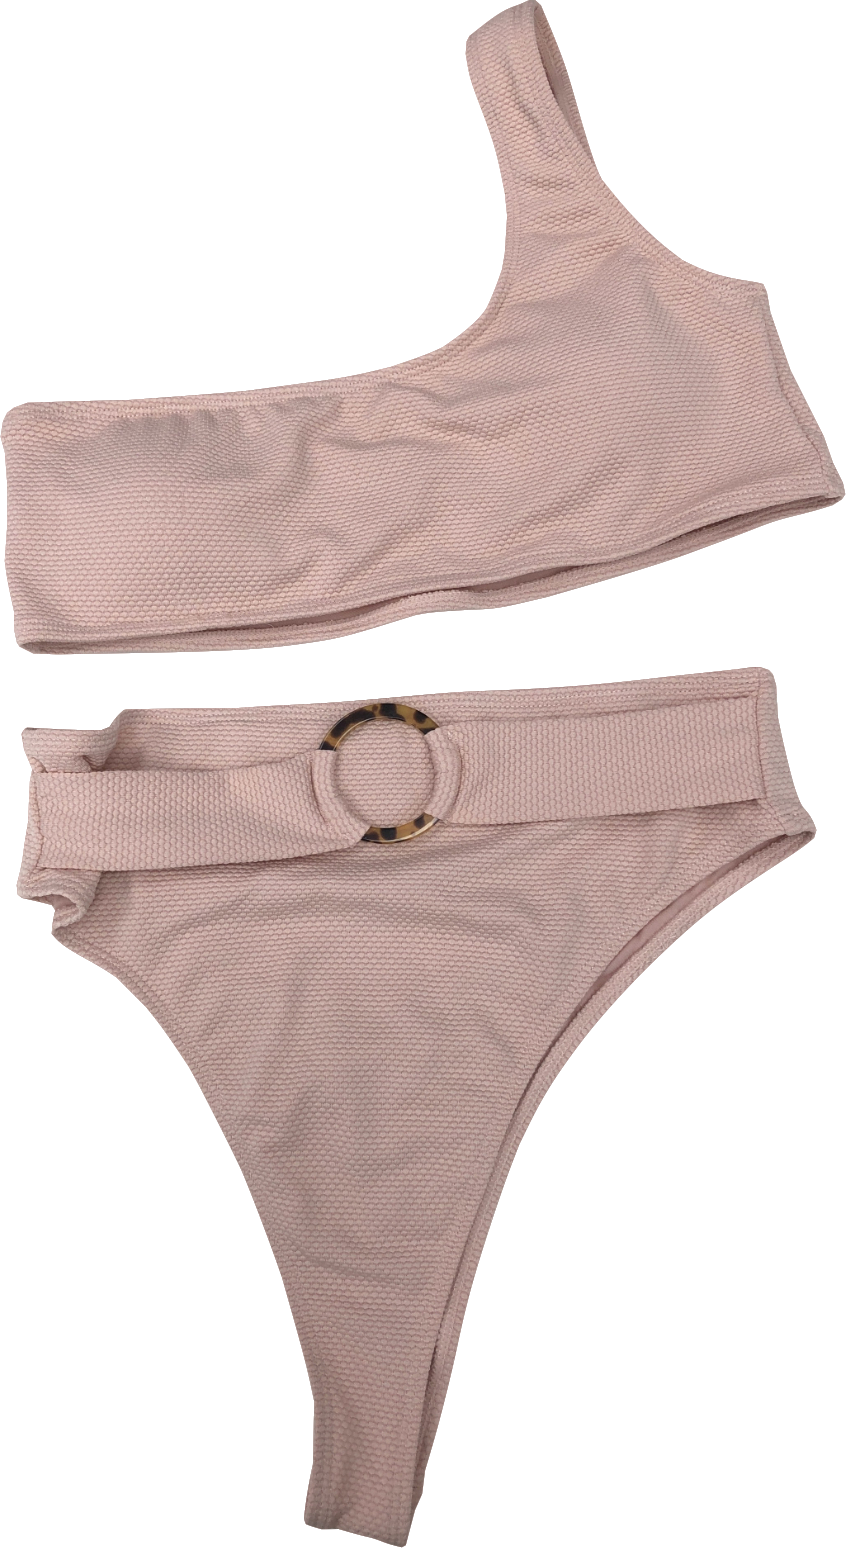 SANNA'S Transparent Strap Micro Thong - Nude Beige Pink